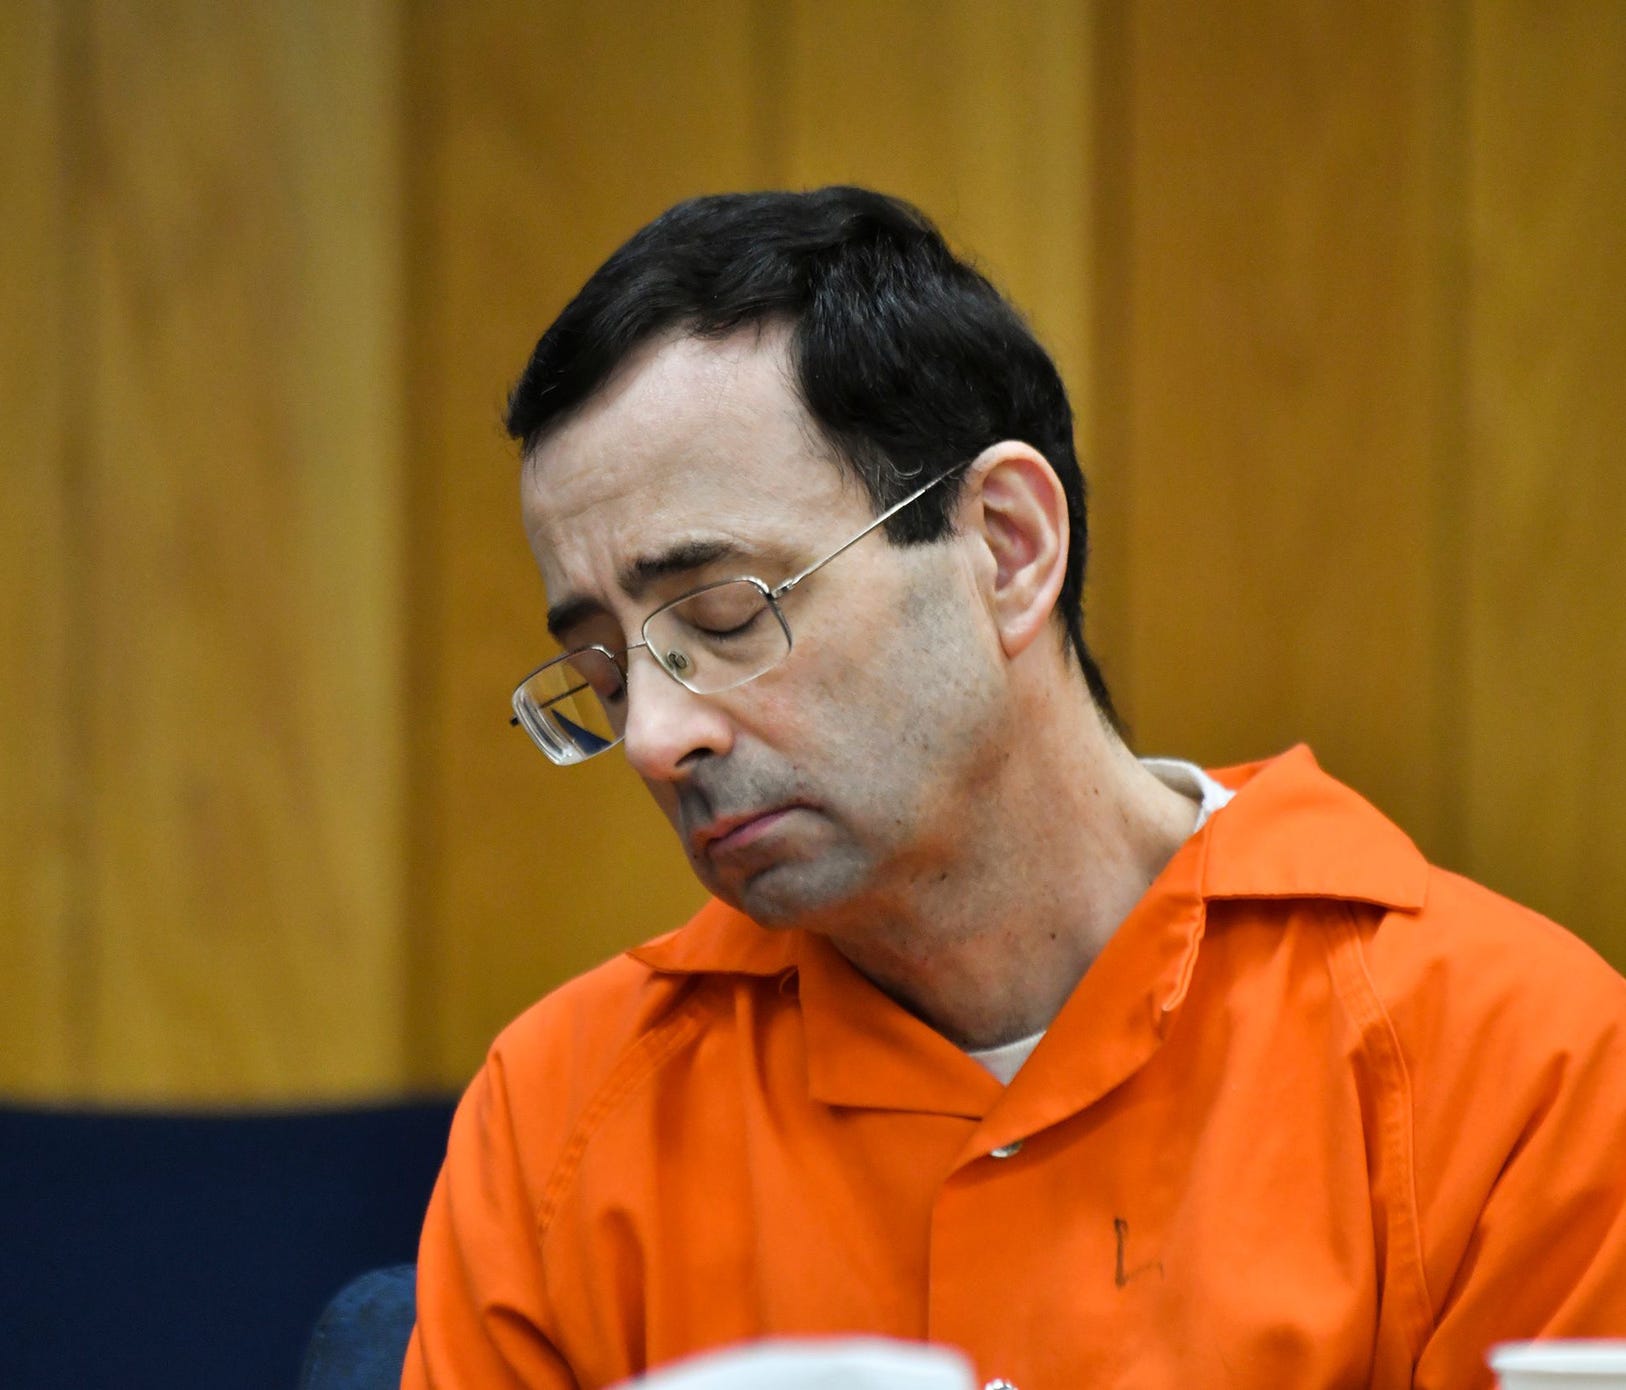 Larry Nassar hangs his head Wednesday, Jan. 31, 2018, during the first day of victim-impact statements in Eaton County (Mich.) Circuit Court in Charlotte, Mich., where Nassar is expected to be sentenced on three counts of sexual assault some time nex